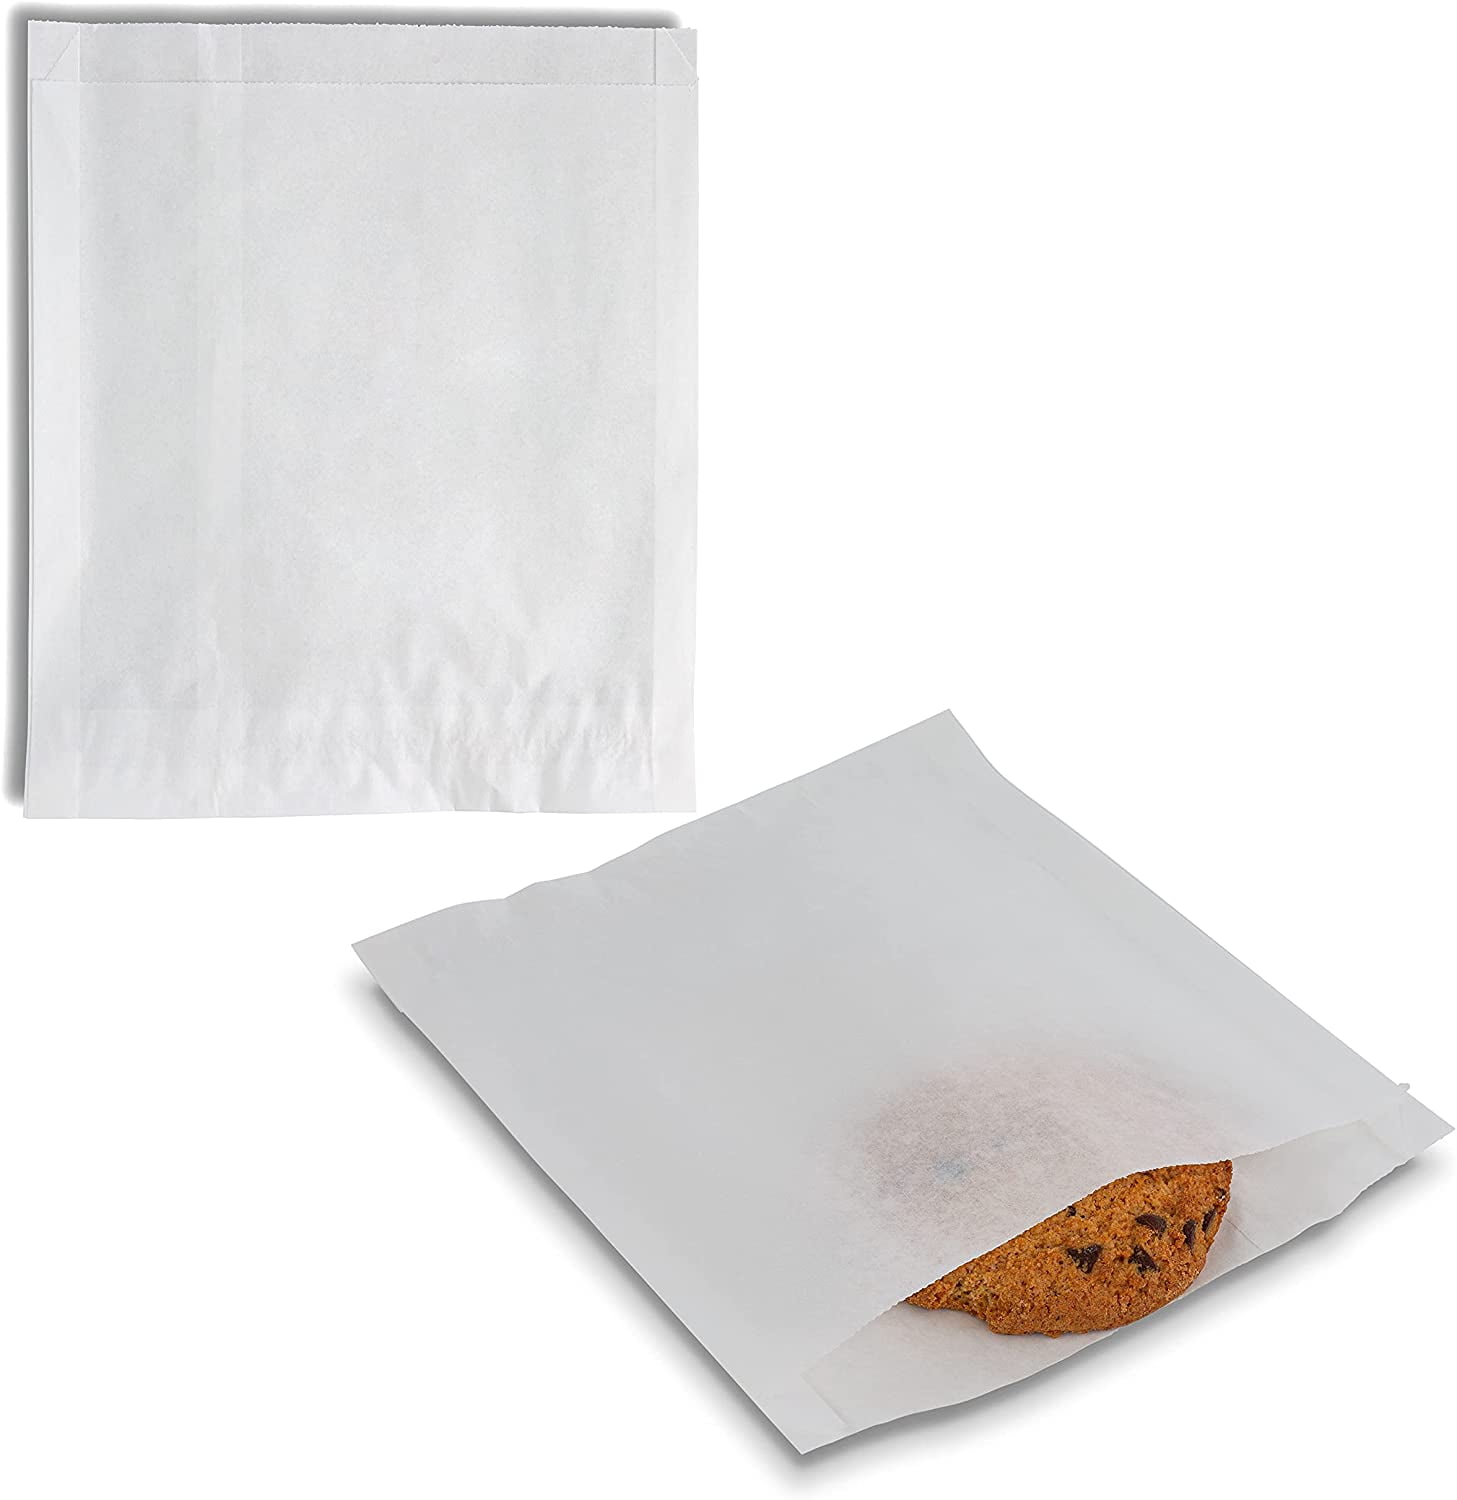 Glassines Stamp Waxed Moisture Resistant Wax Paper Bags Blank 600 Count -  China Wax Paper Bag, Glassine Wax Paper Bag